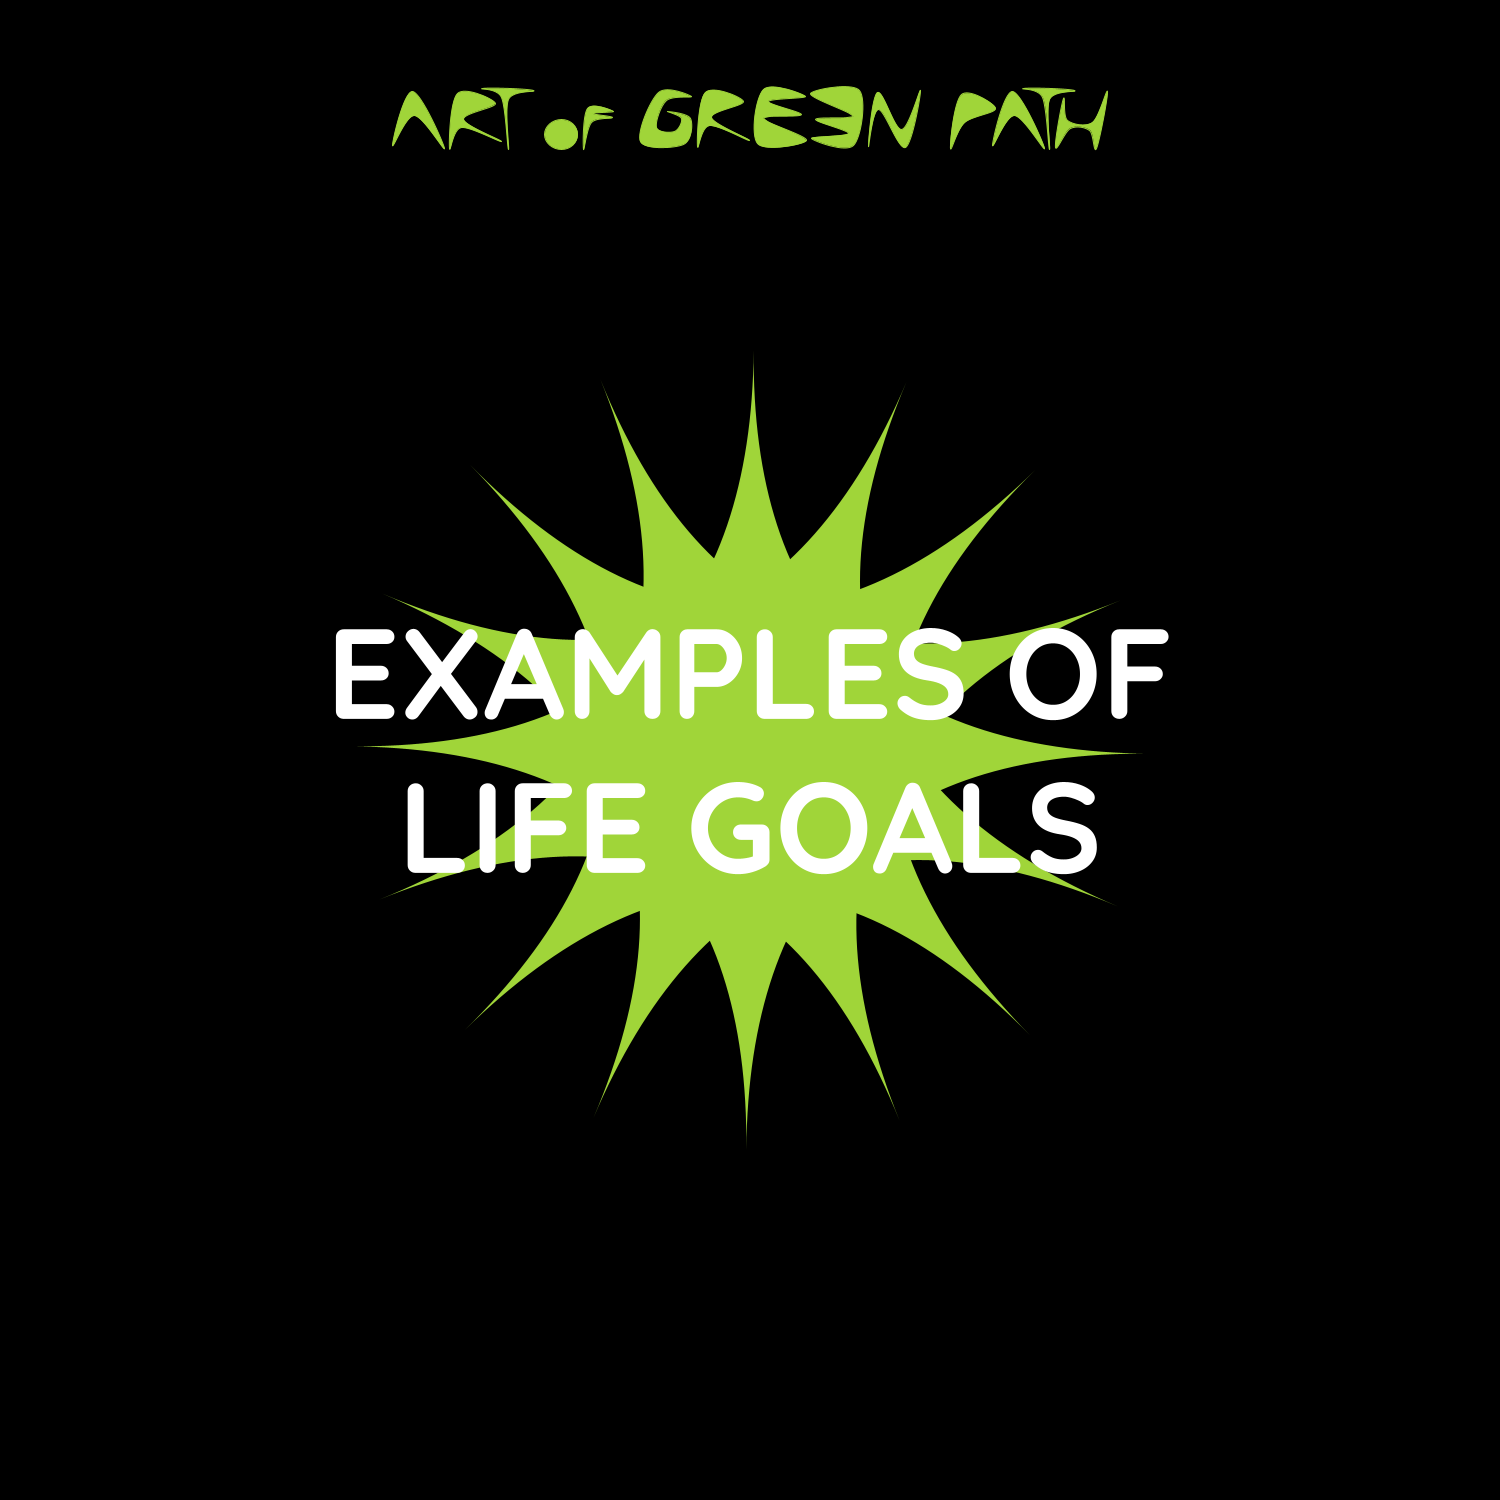 Examples Of Life Goals - Your Life Change Guide - Art Of Green Path